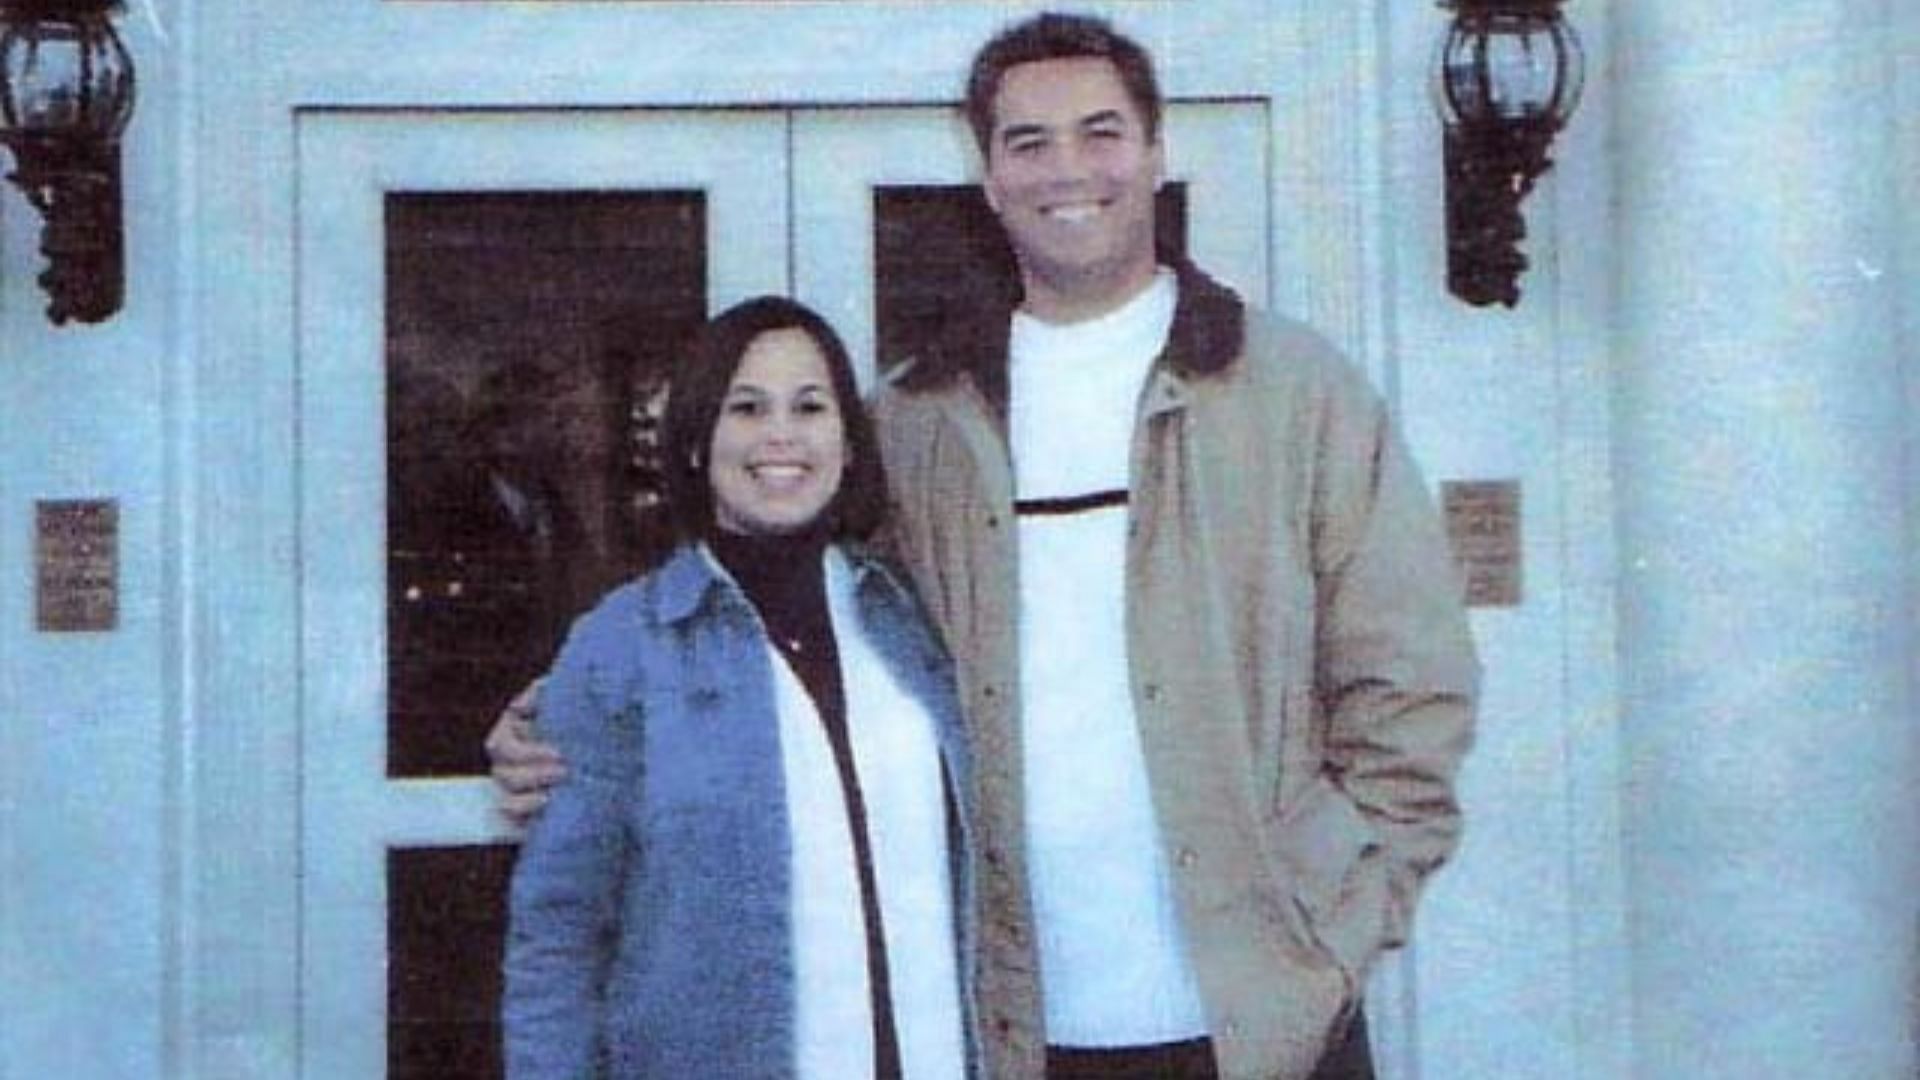 Laci and Scott Peterson (Photo from evidence for the case)